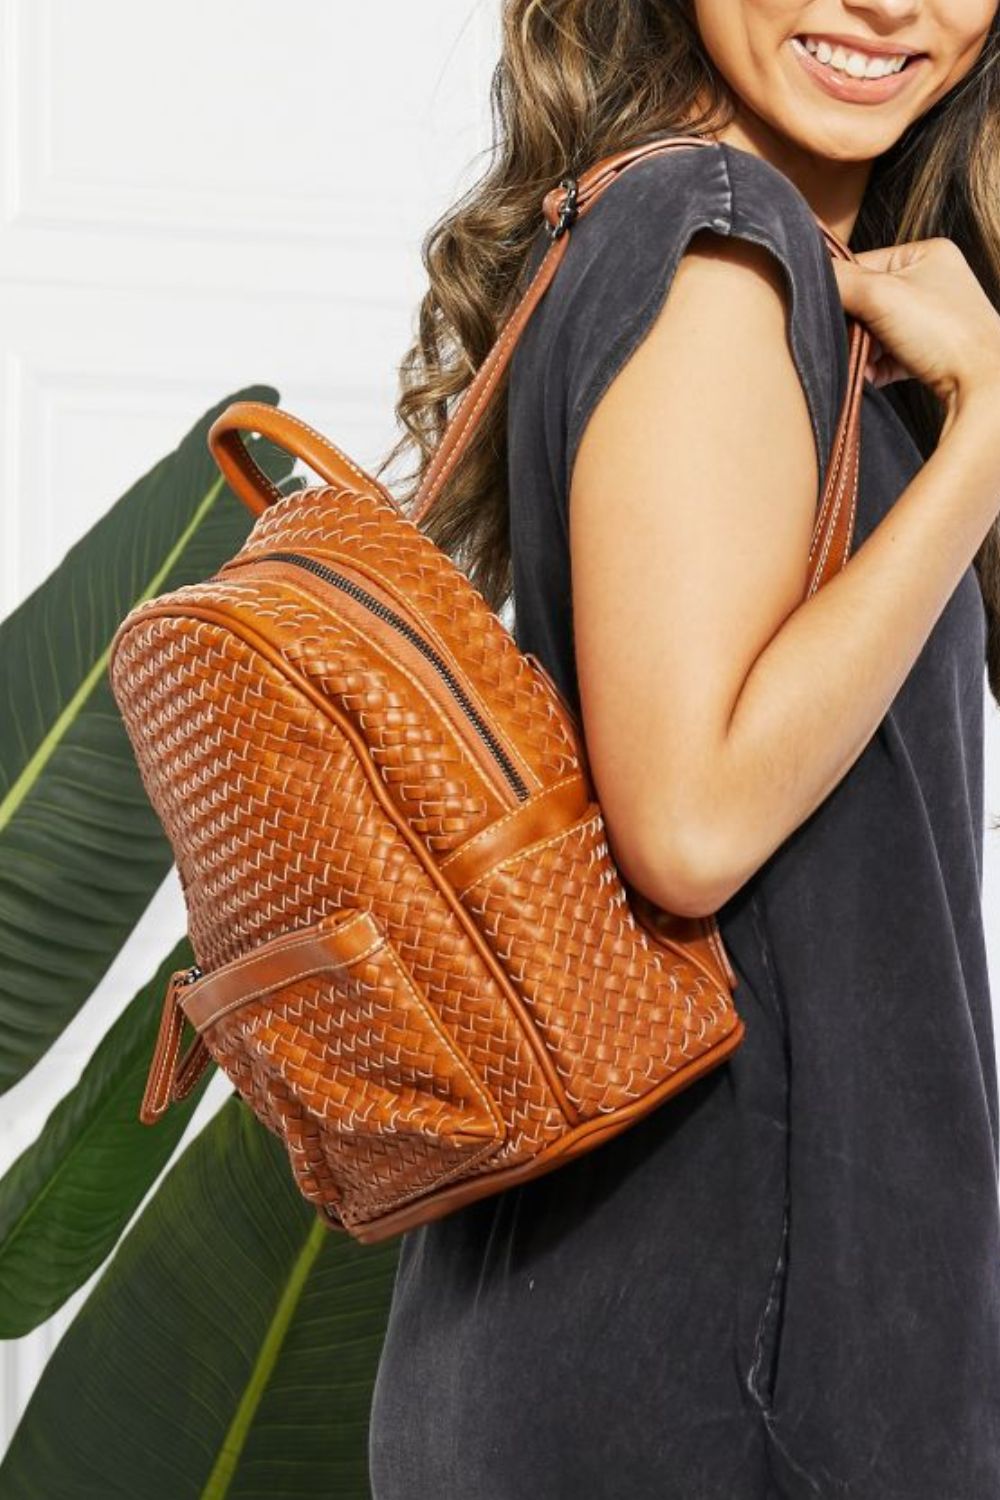 Bohemian Certainly Chic Faux Leather Woven Backpack Bag